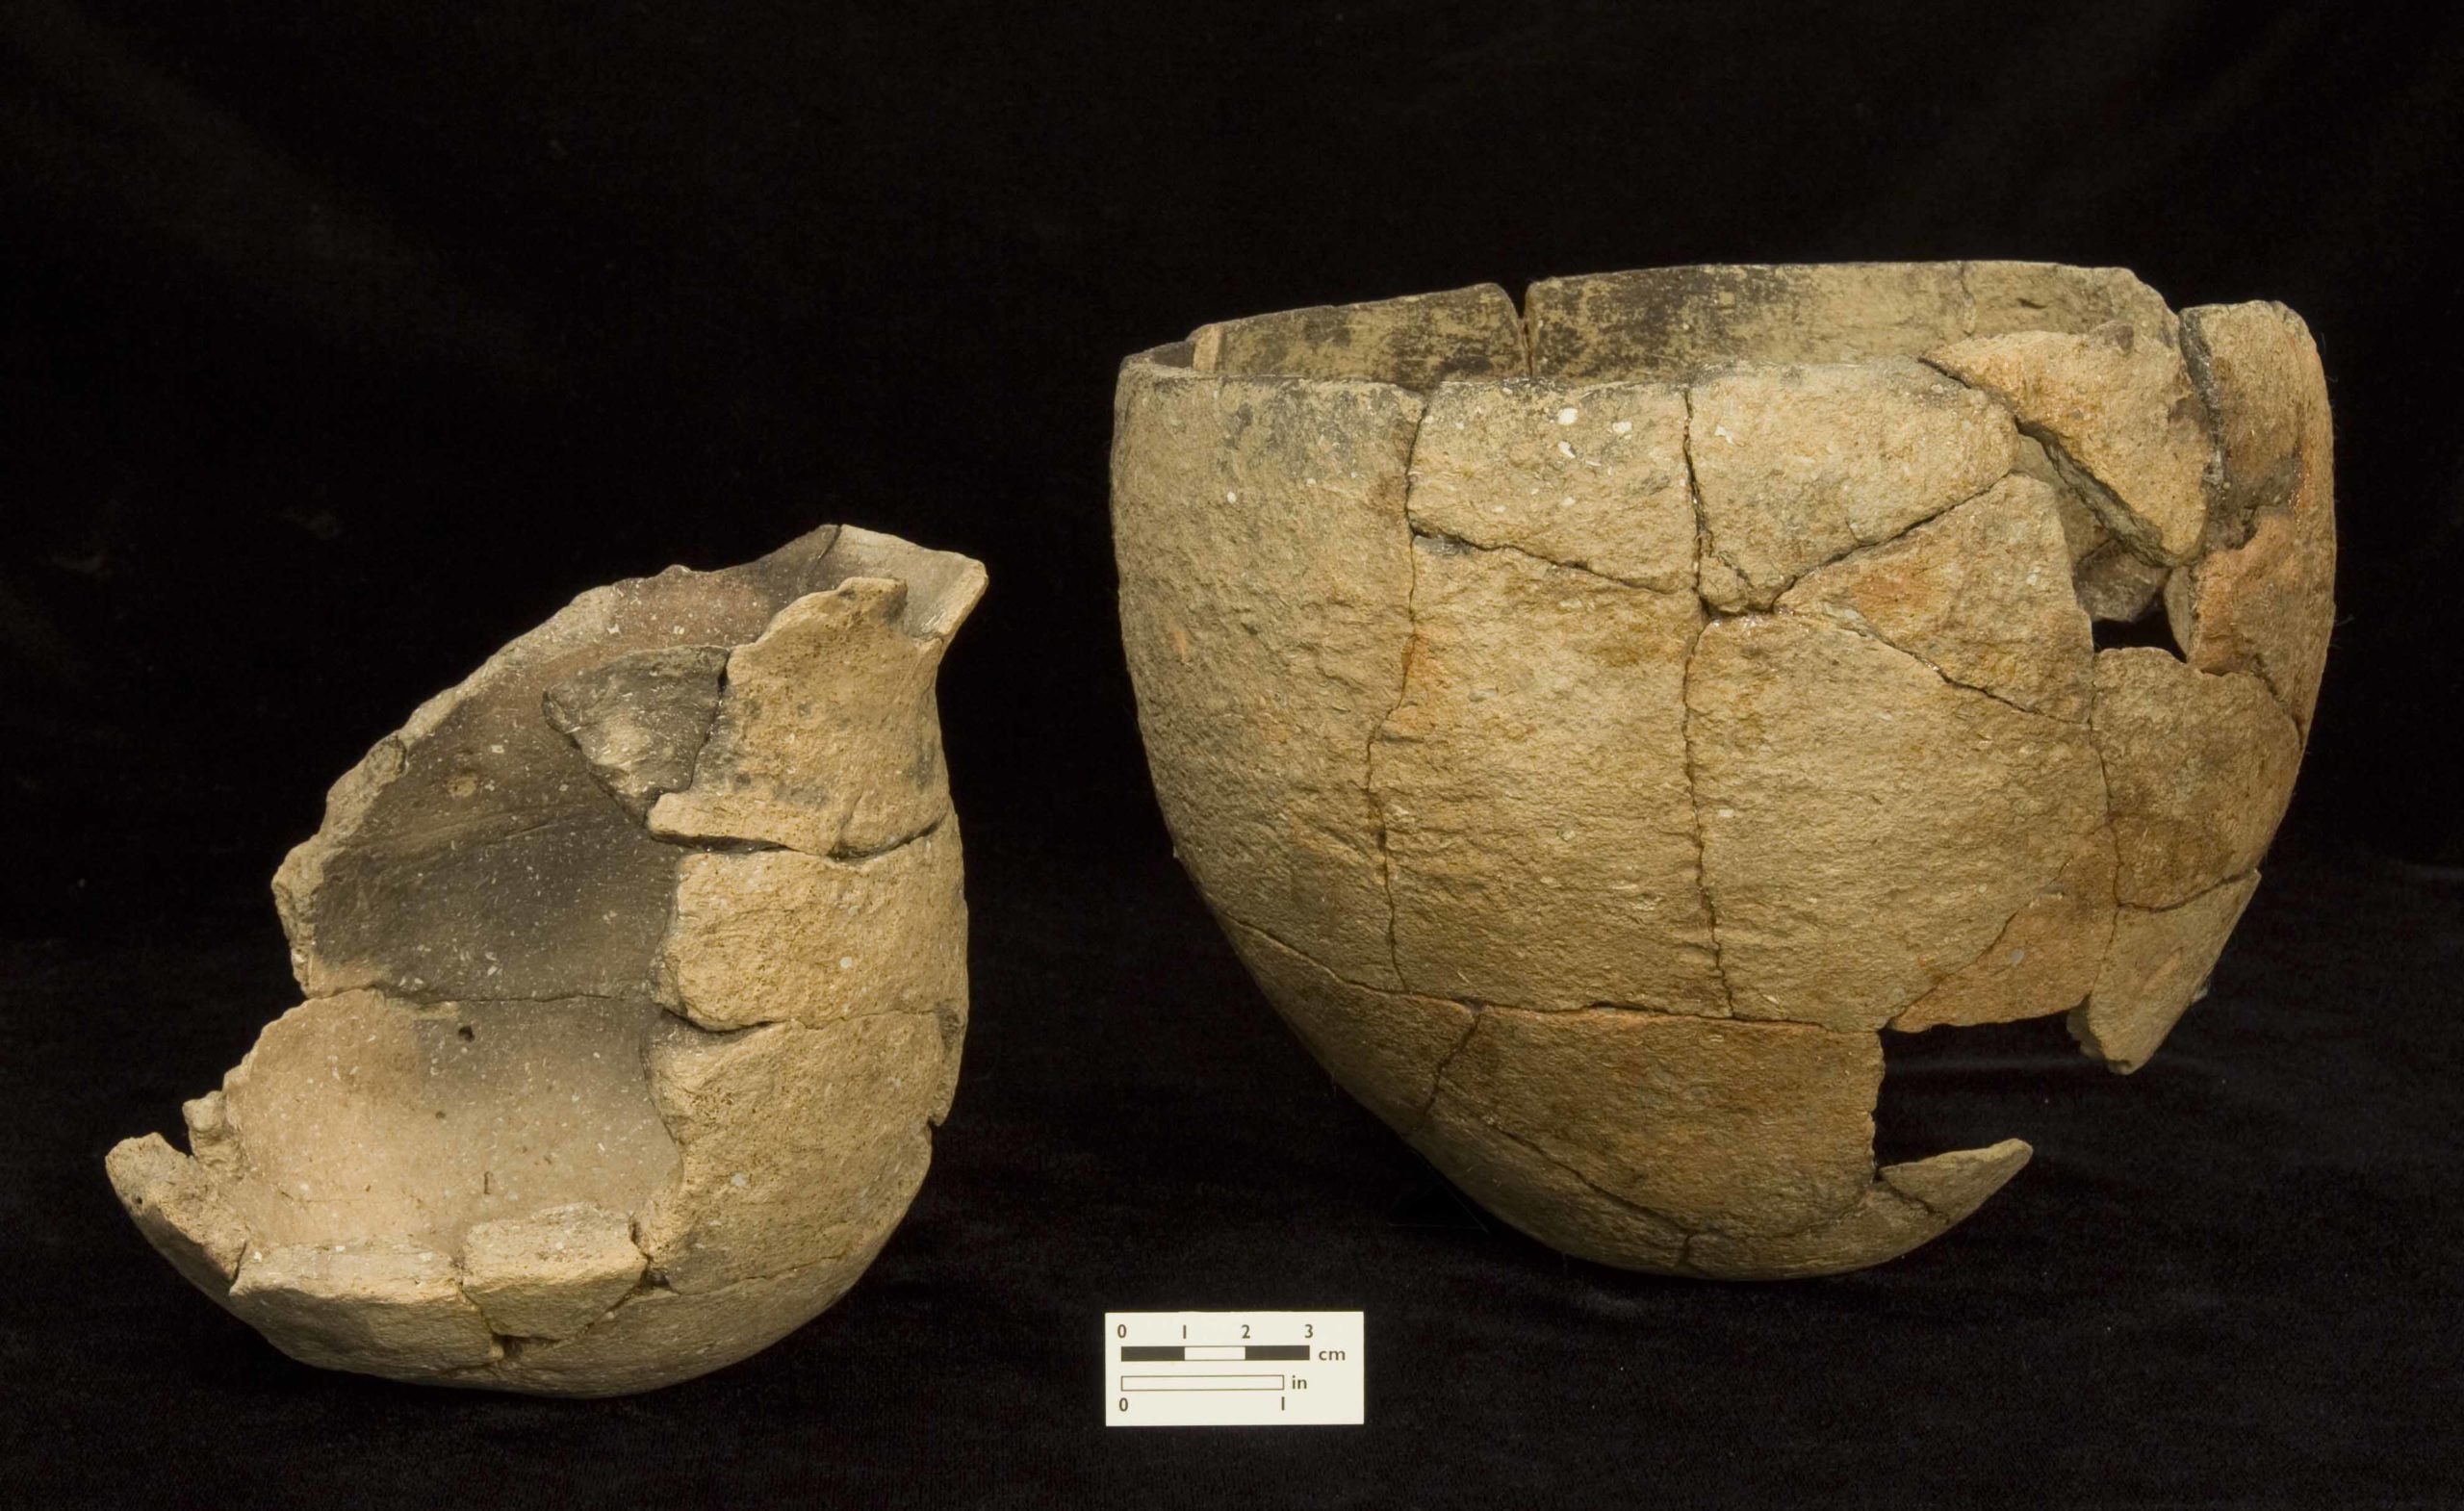 Mended Native American Pottery from James Fort Excavations | Historic